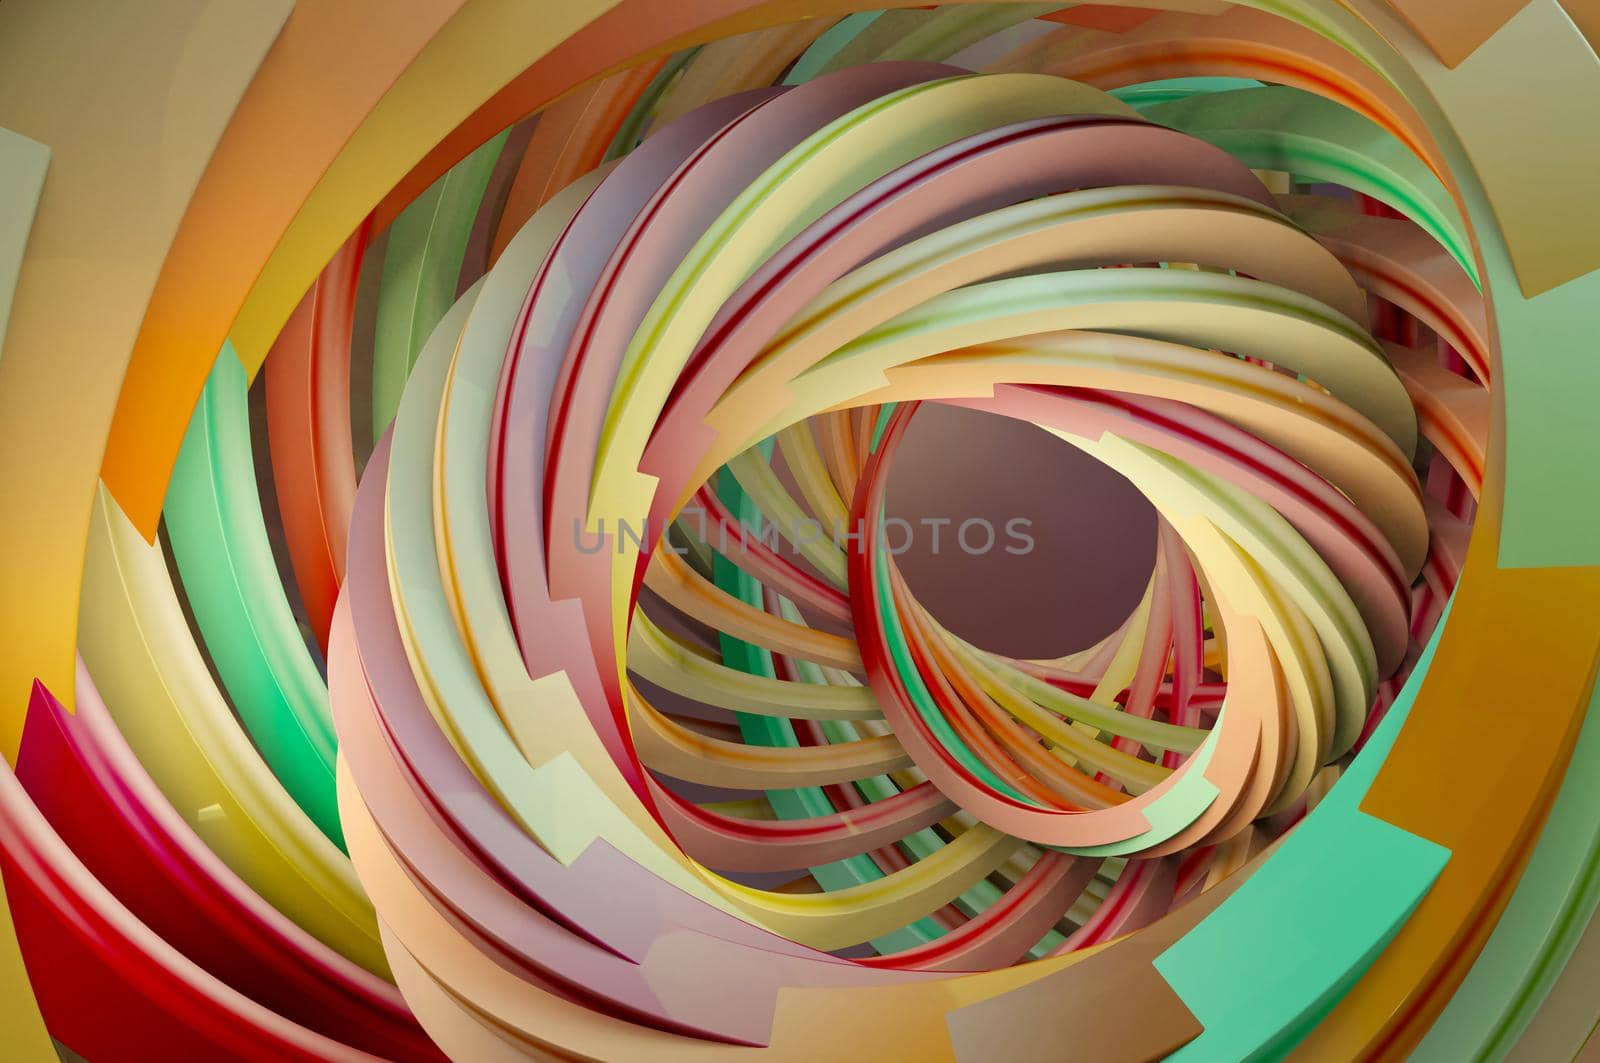 3d illustration. Abstract 3d rendering of twisted lines. Modern background design by Hepjam